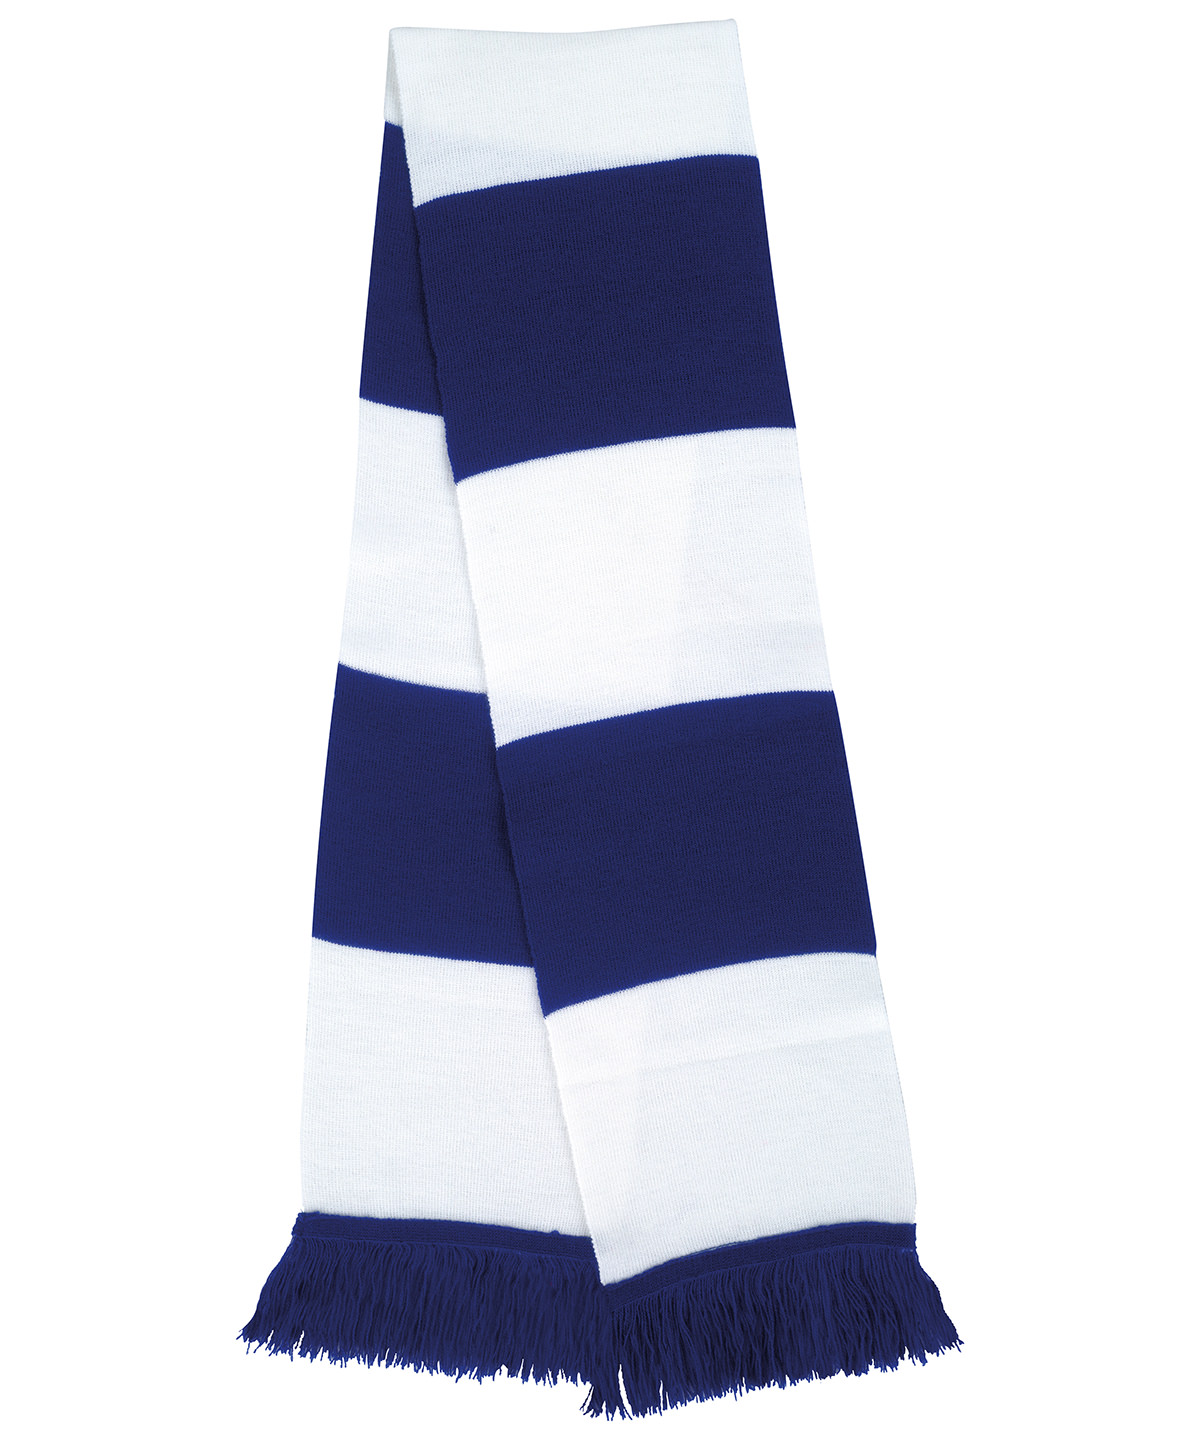 Team Scarf Royal/White Size One Size